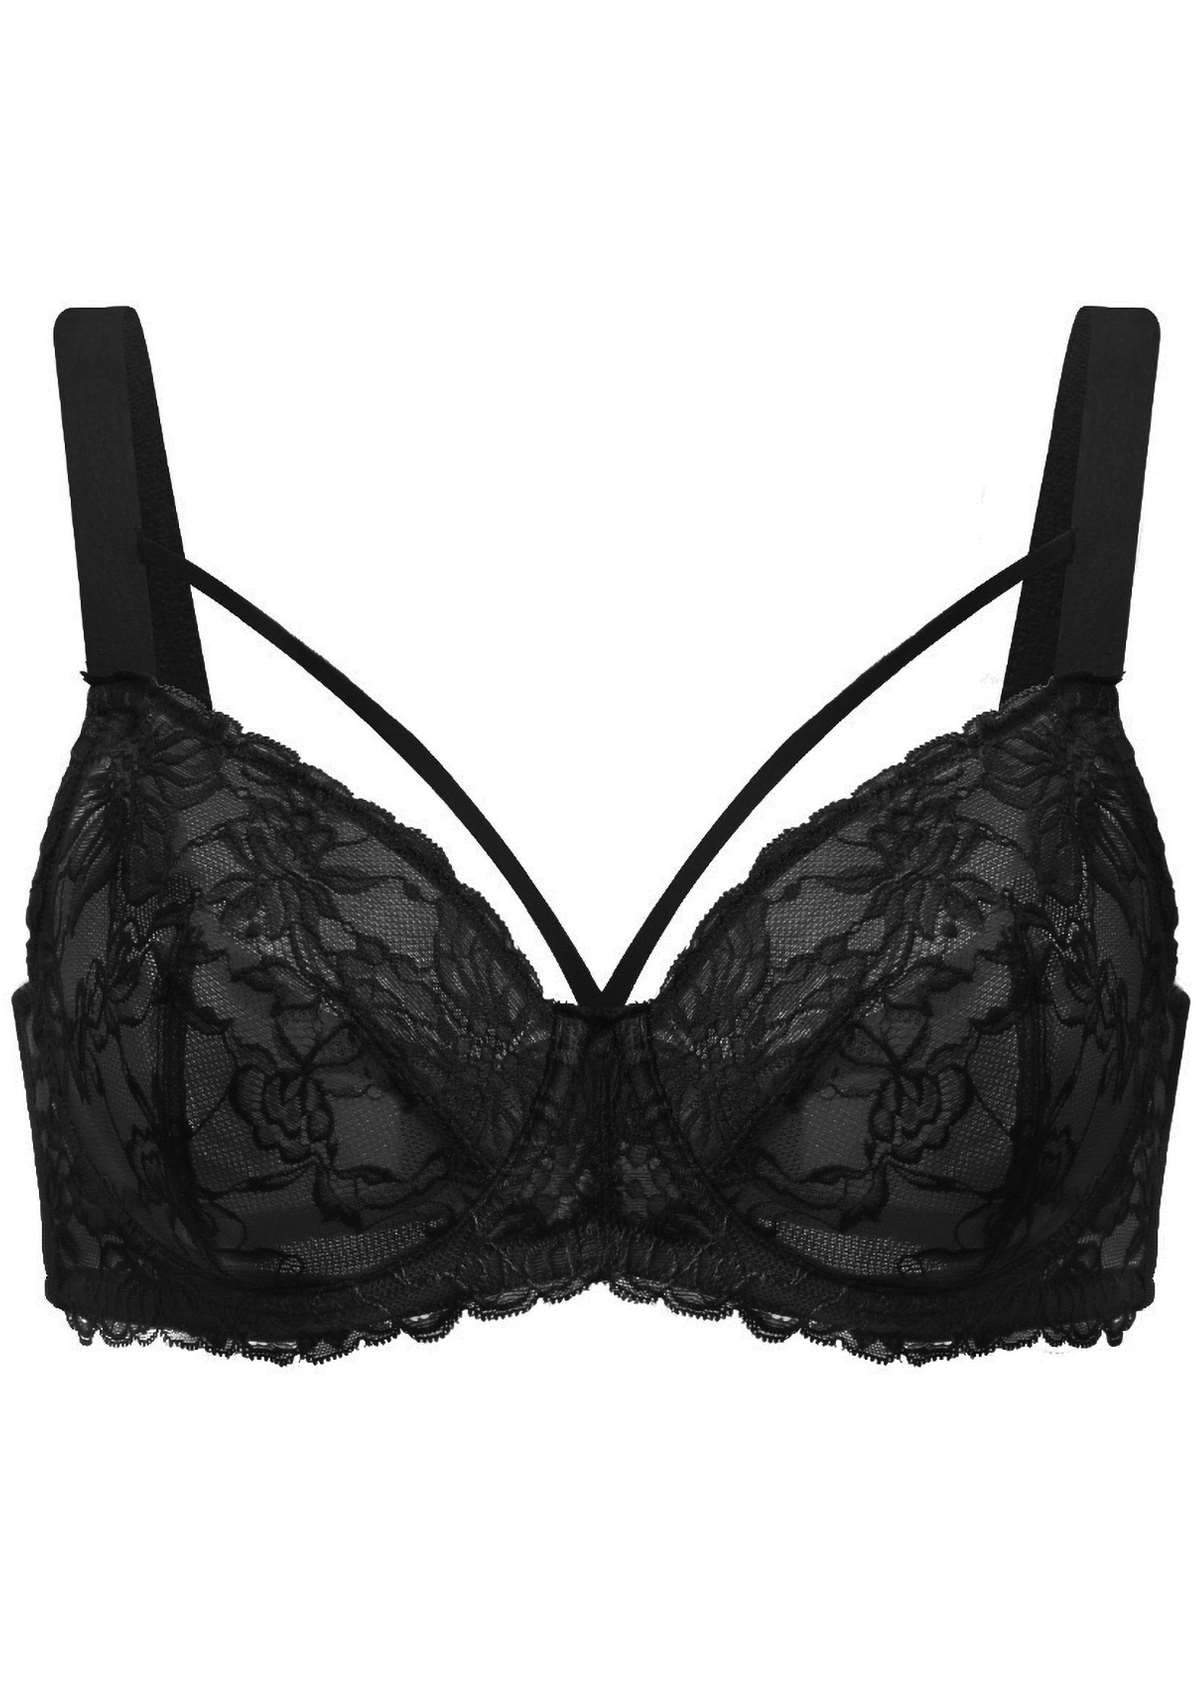 HSIA Pretty In Petals Bra - Plus Size Lingerie For Comfrot And Support - Black / 44 / I